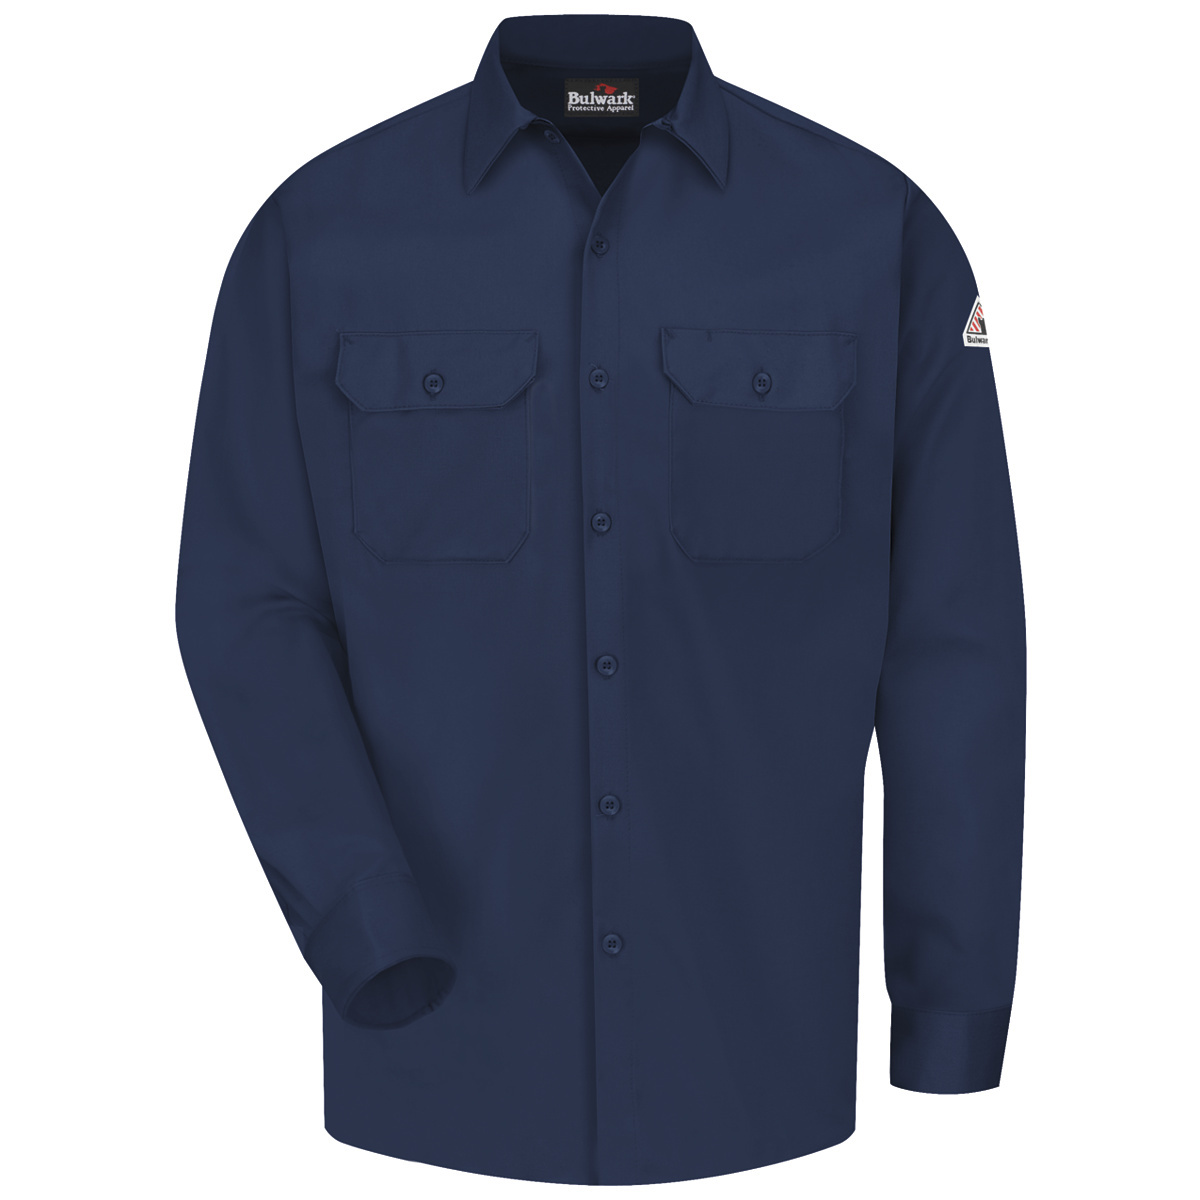 Bulwark® Medium Tall Navy Blue Westex Ultrasoft®/Cotton/Nylon Flame Resistant Work Shirt With Button Front Closure